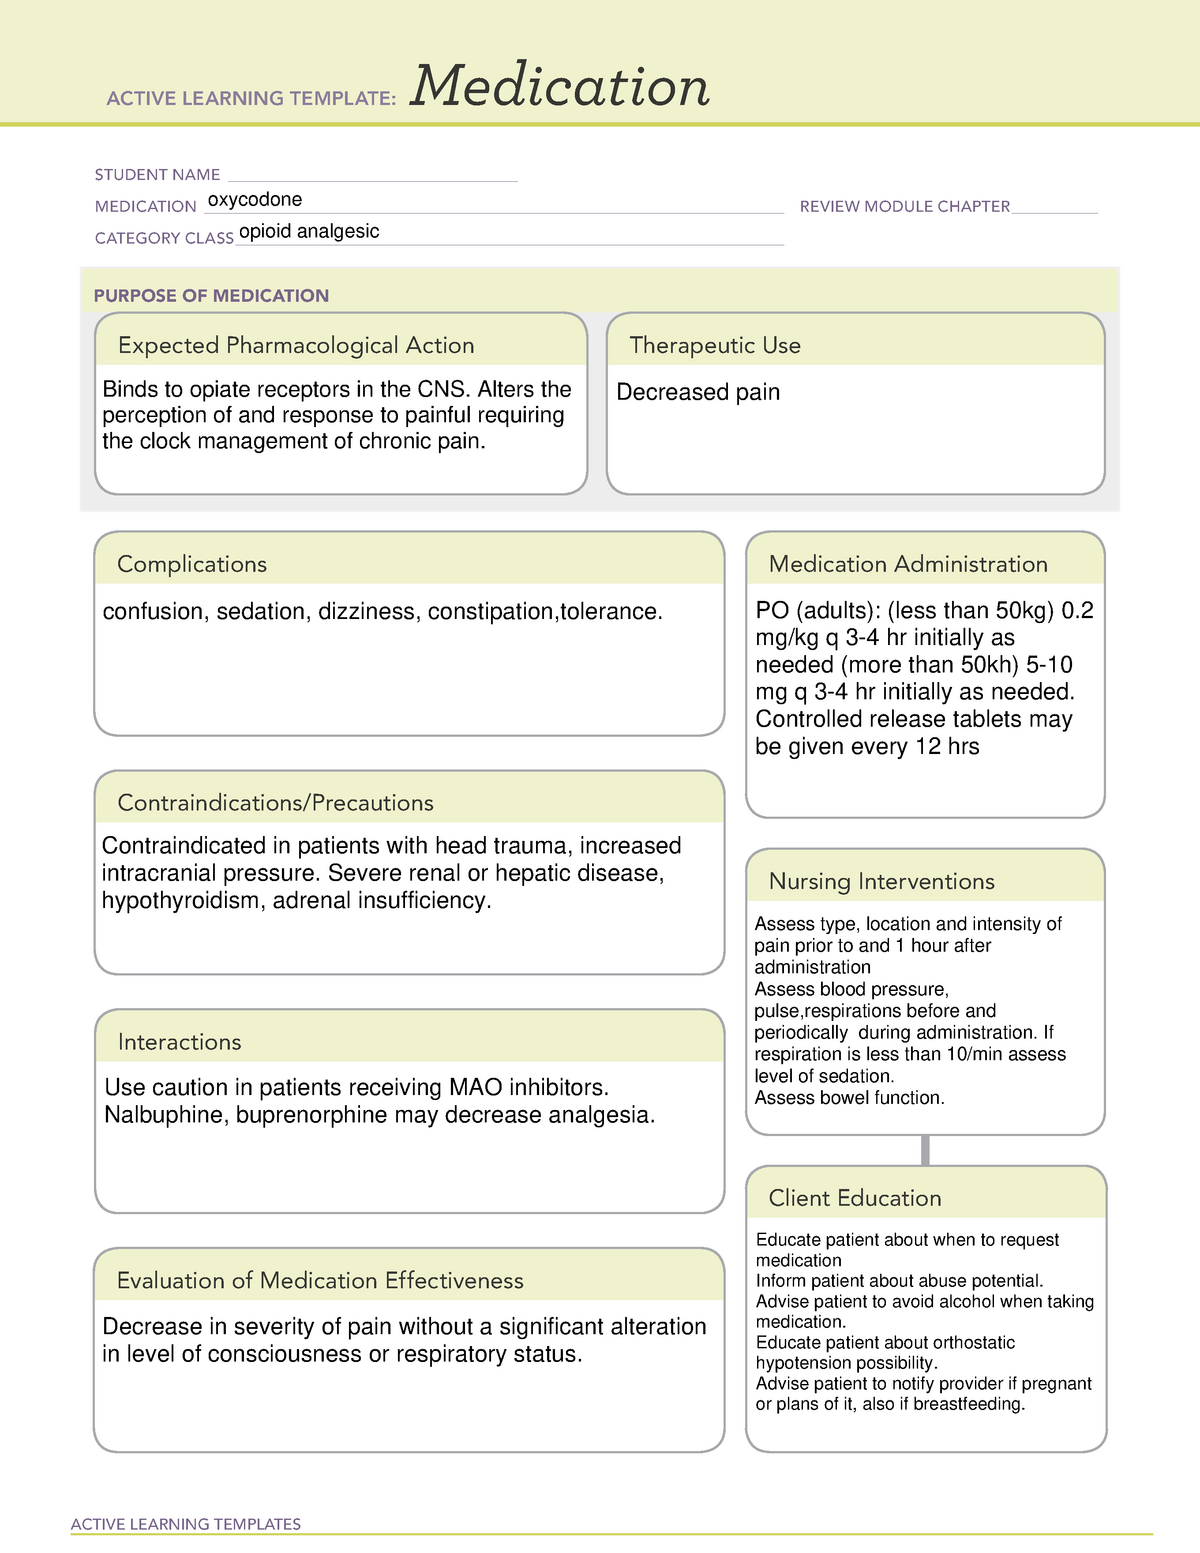 Oxycodone Medication ACTIVE LEARNING TEMPLATES Medication STUDENT